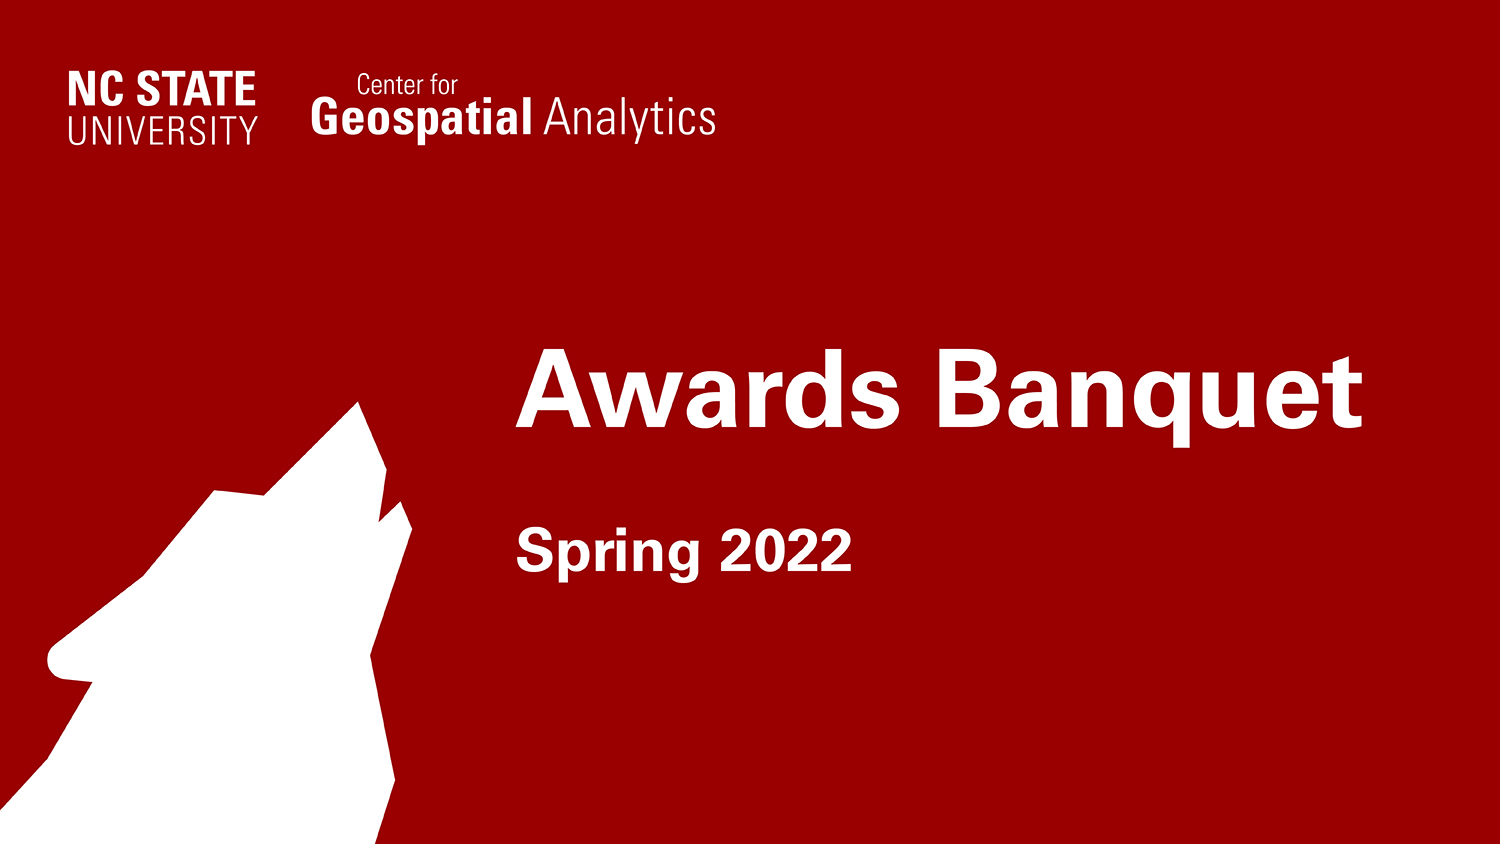 Awards Banquet - Center for Geospatial Analytics at NC State University